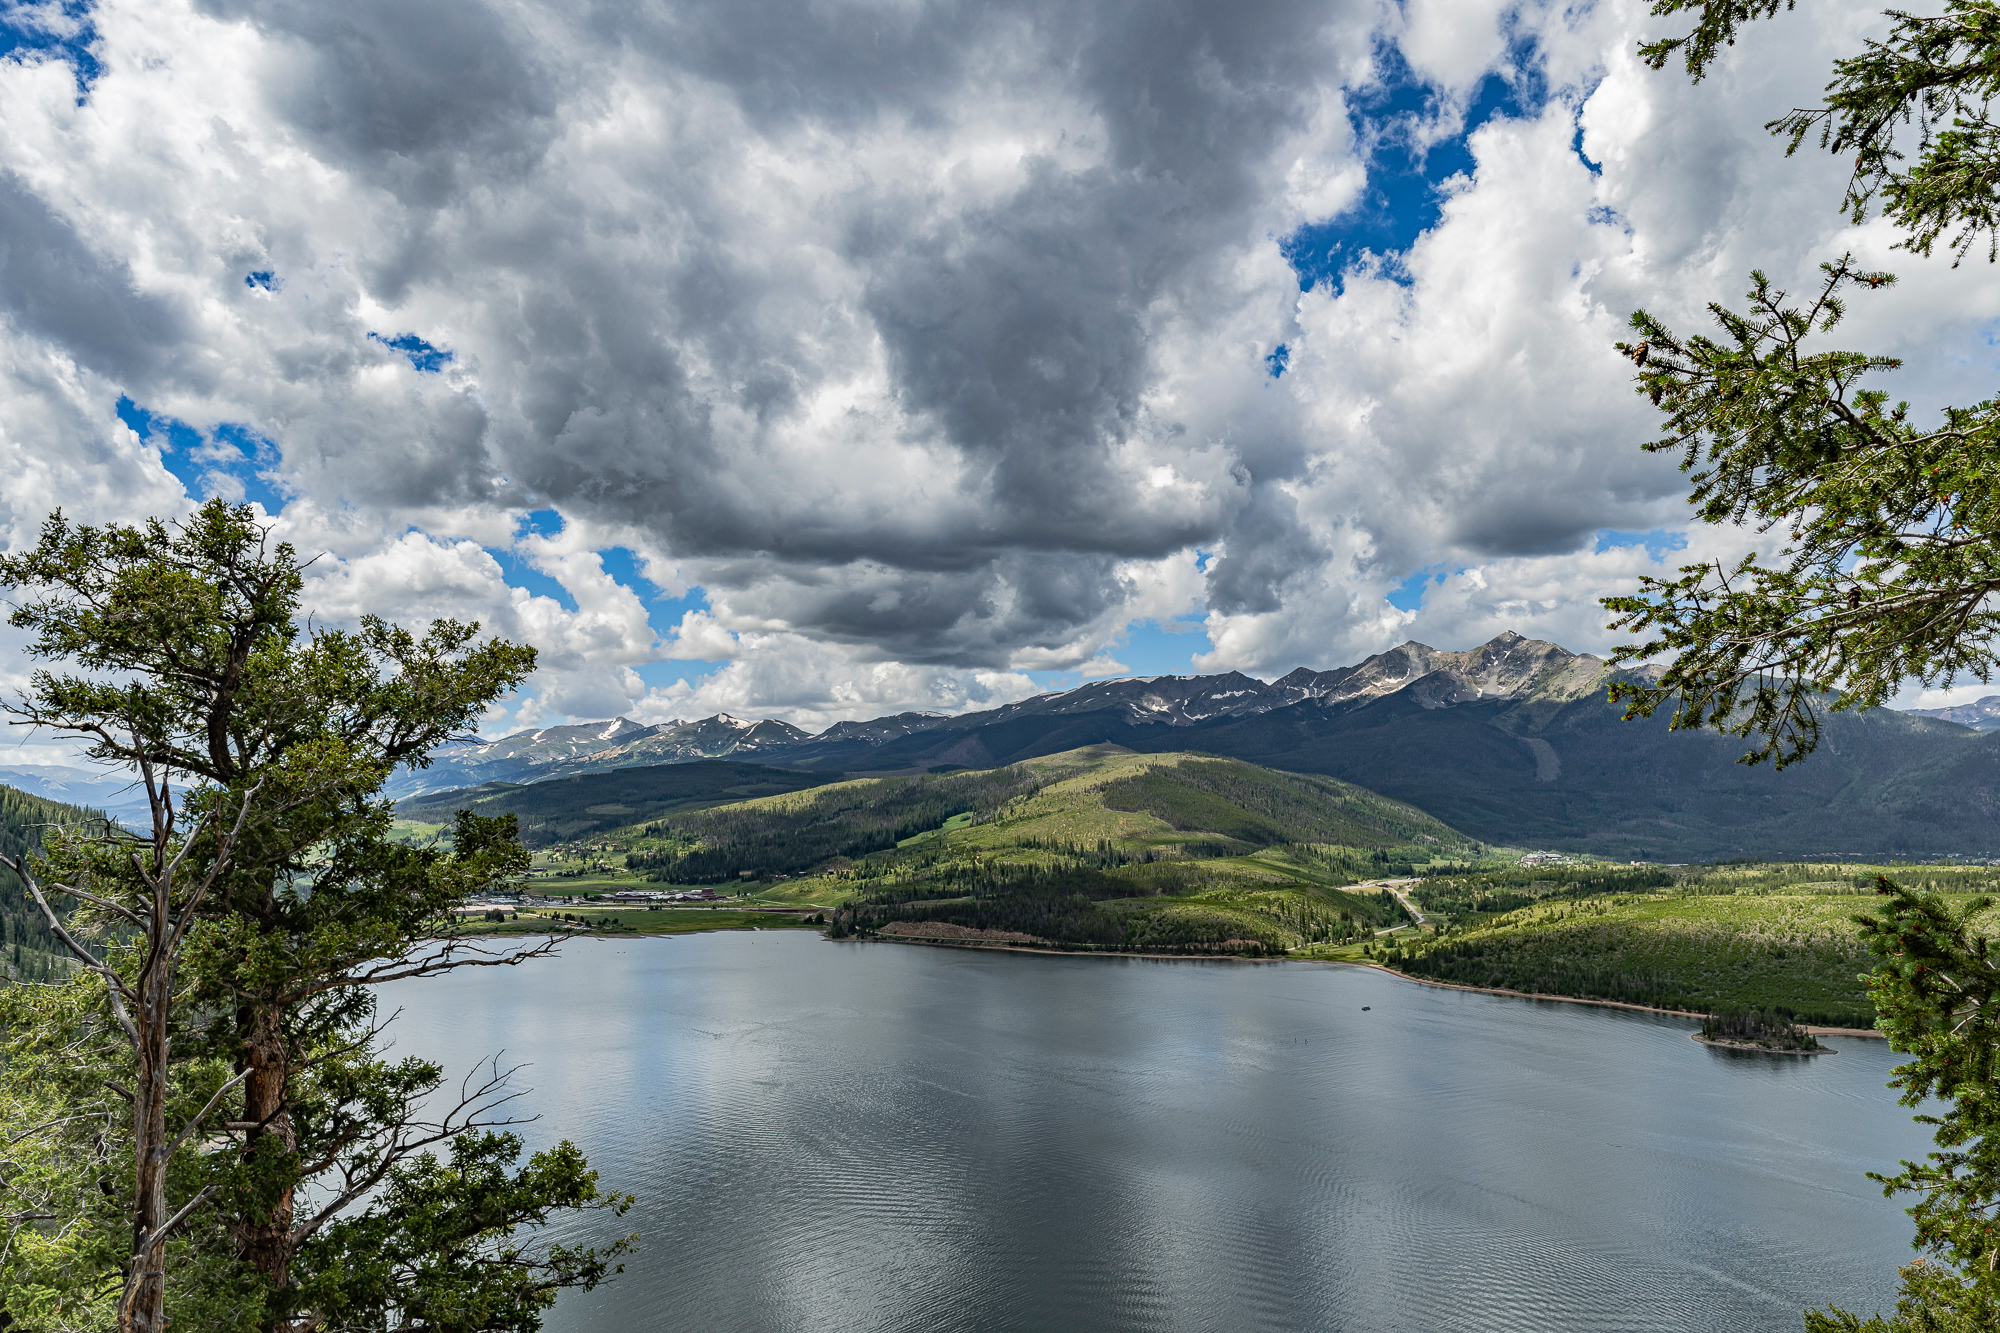 Lake Dillon, CO from a hiking trail, July 4,2022